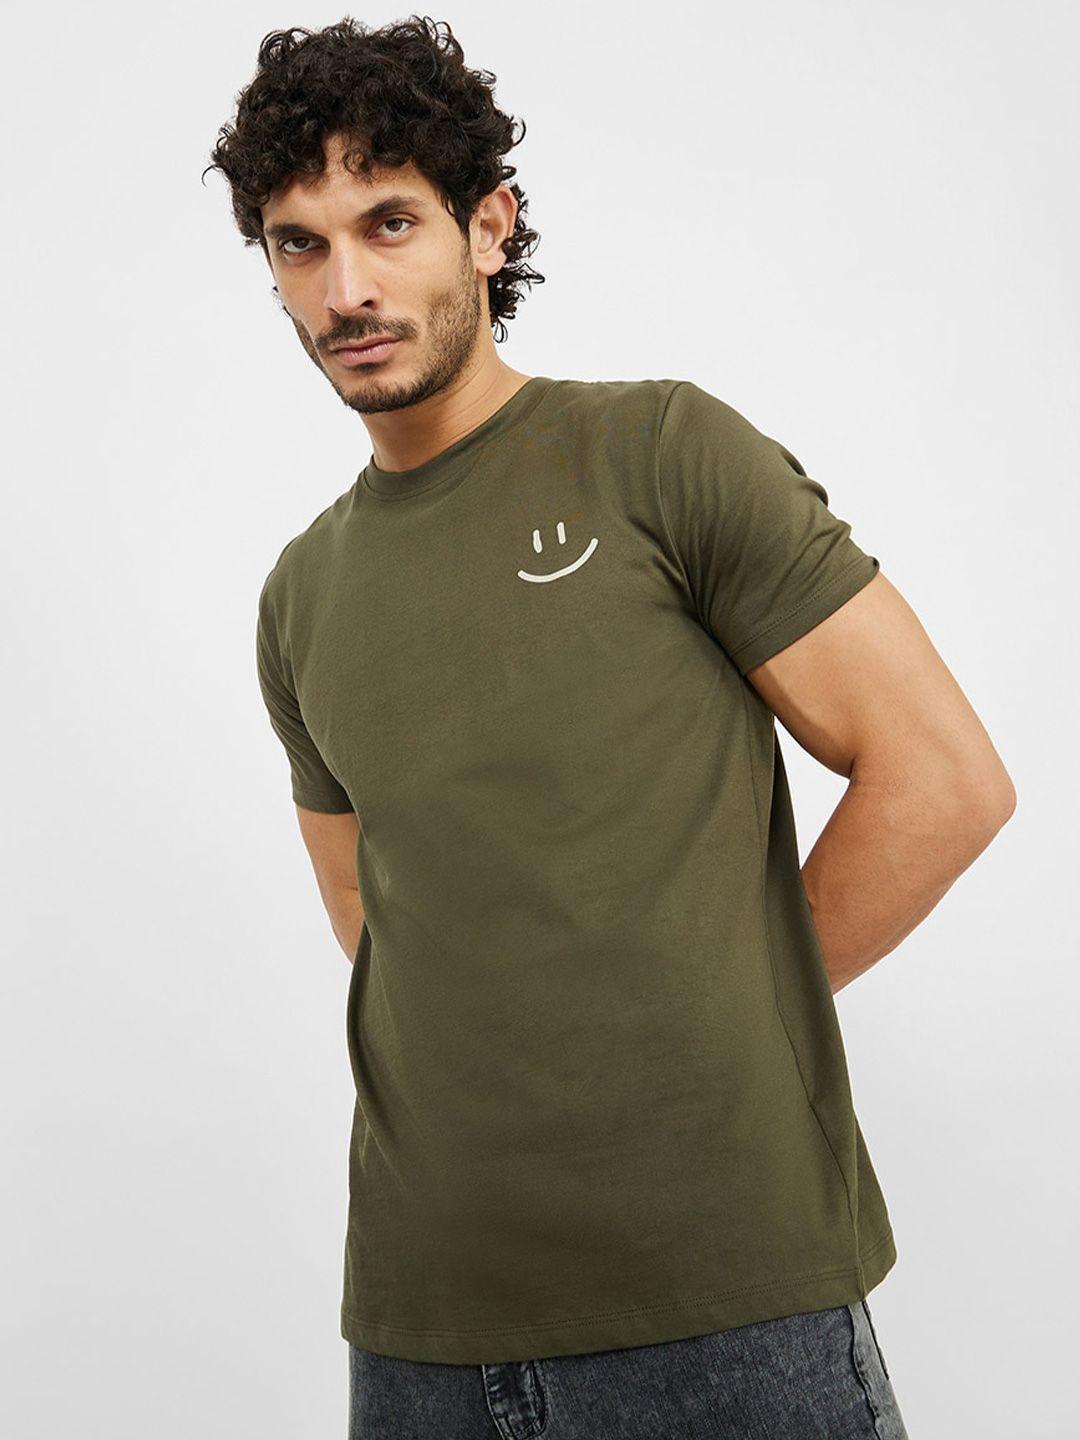 styli-round-neck-short-sleeves-pure-cotton-t-shirt